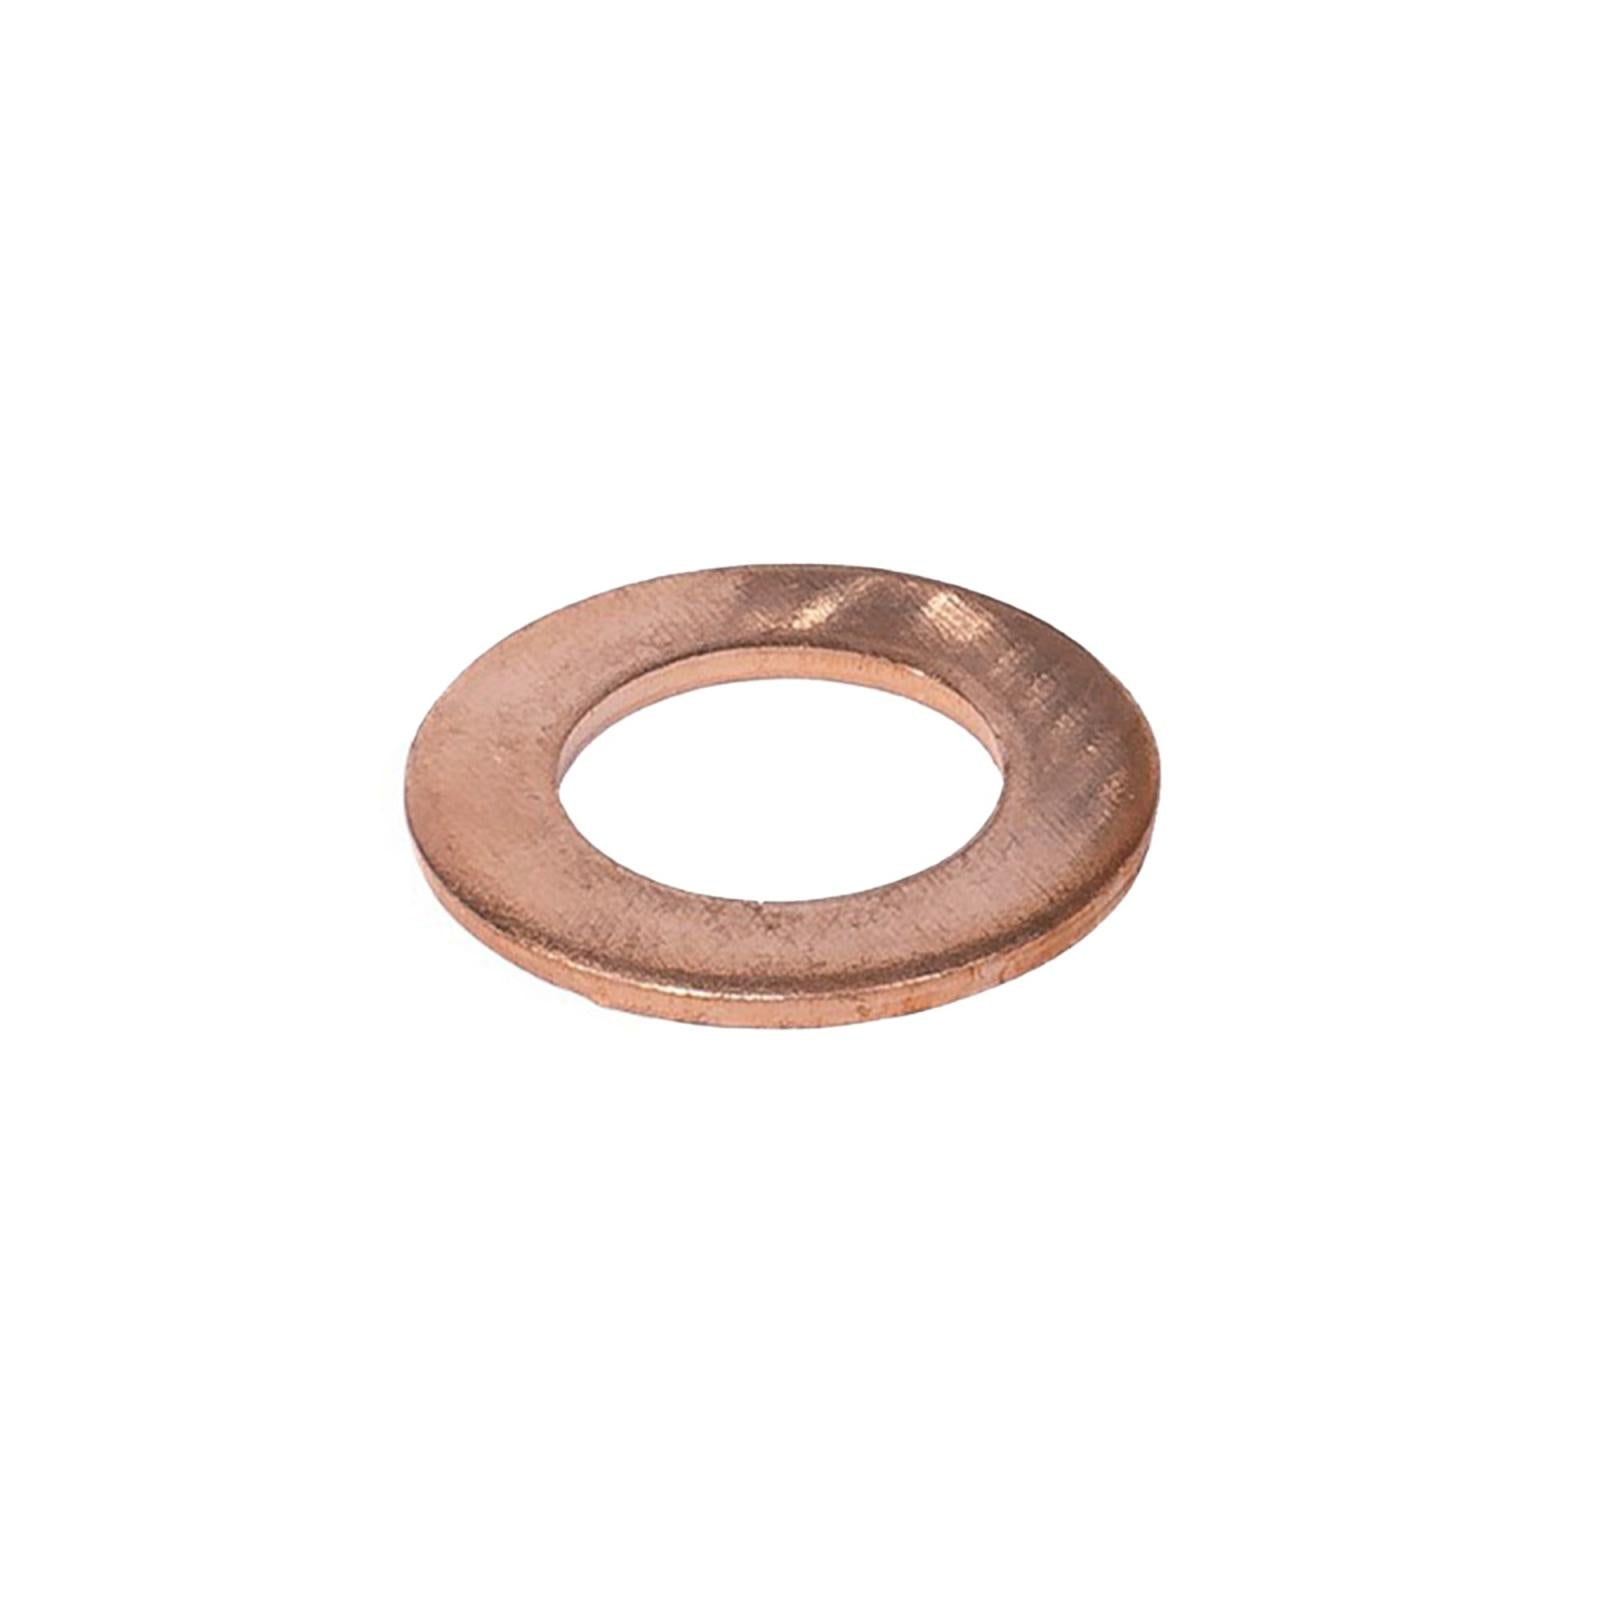 Copper Washer 14mm 01-16